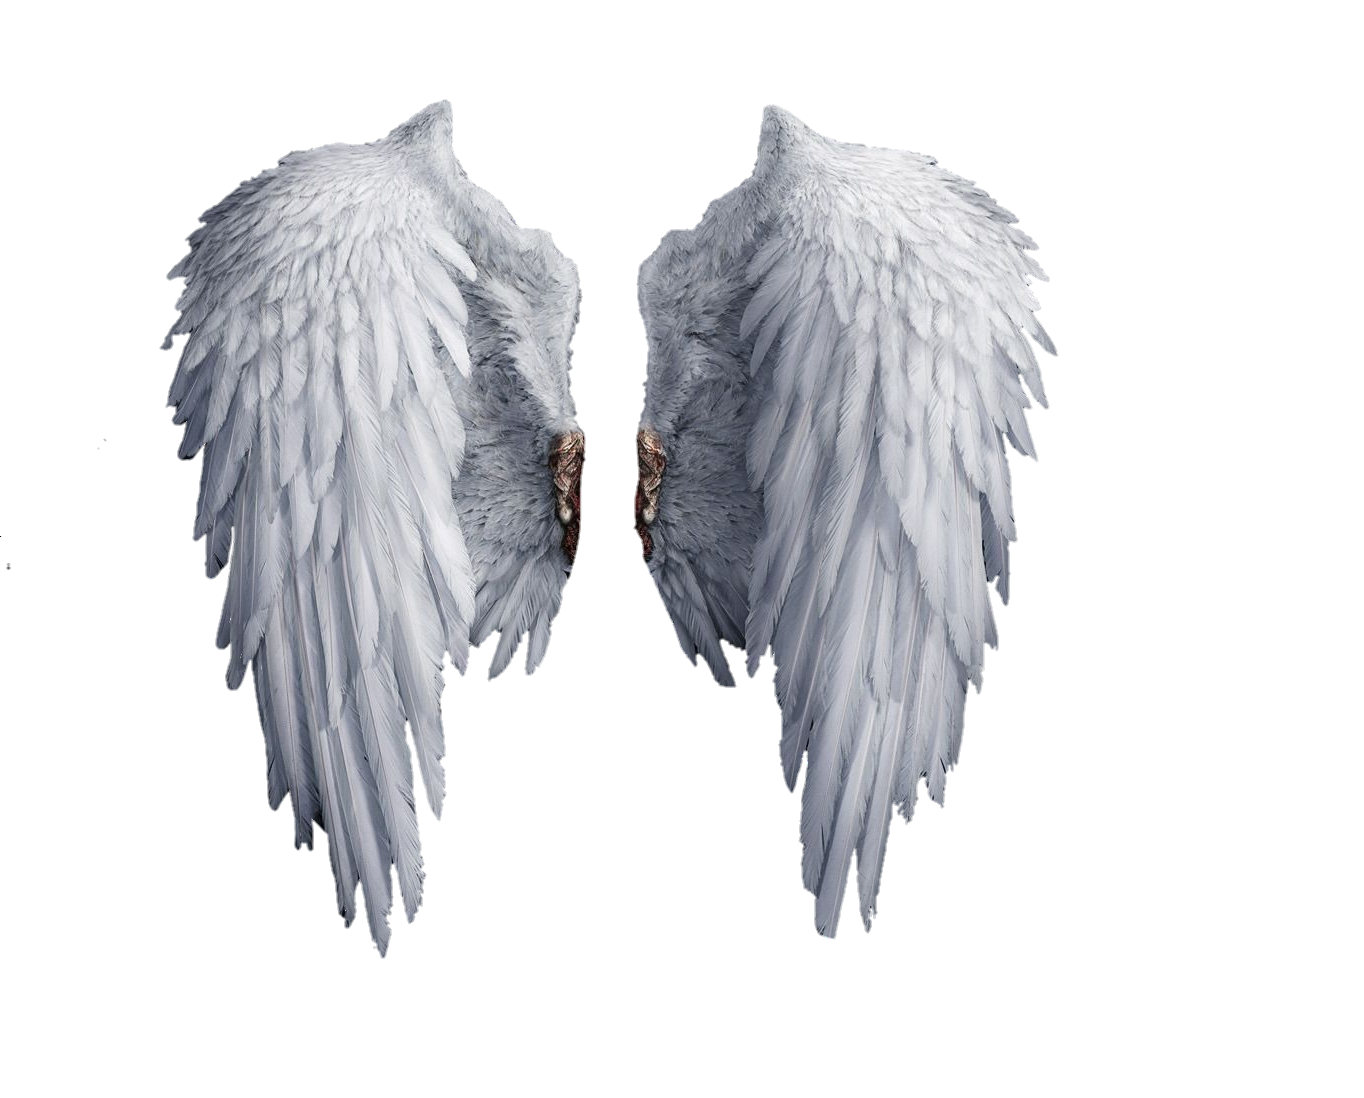 wings-png-image-from-pngfre-7